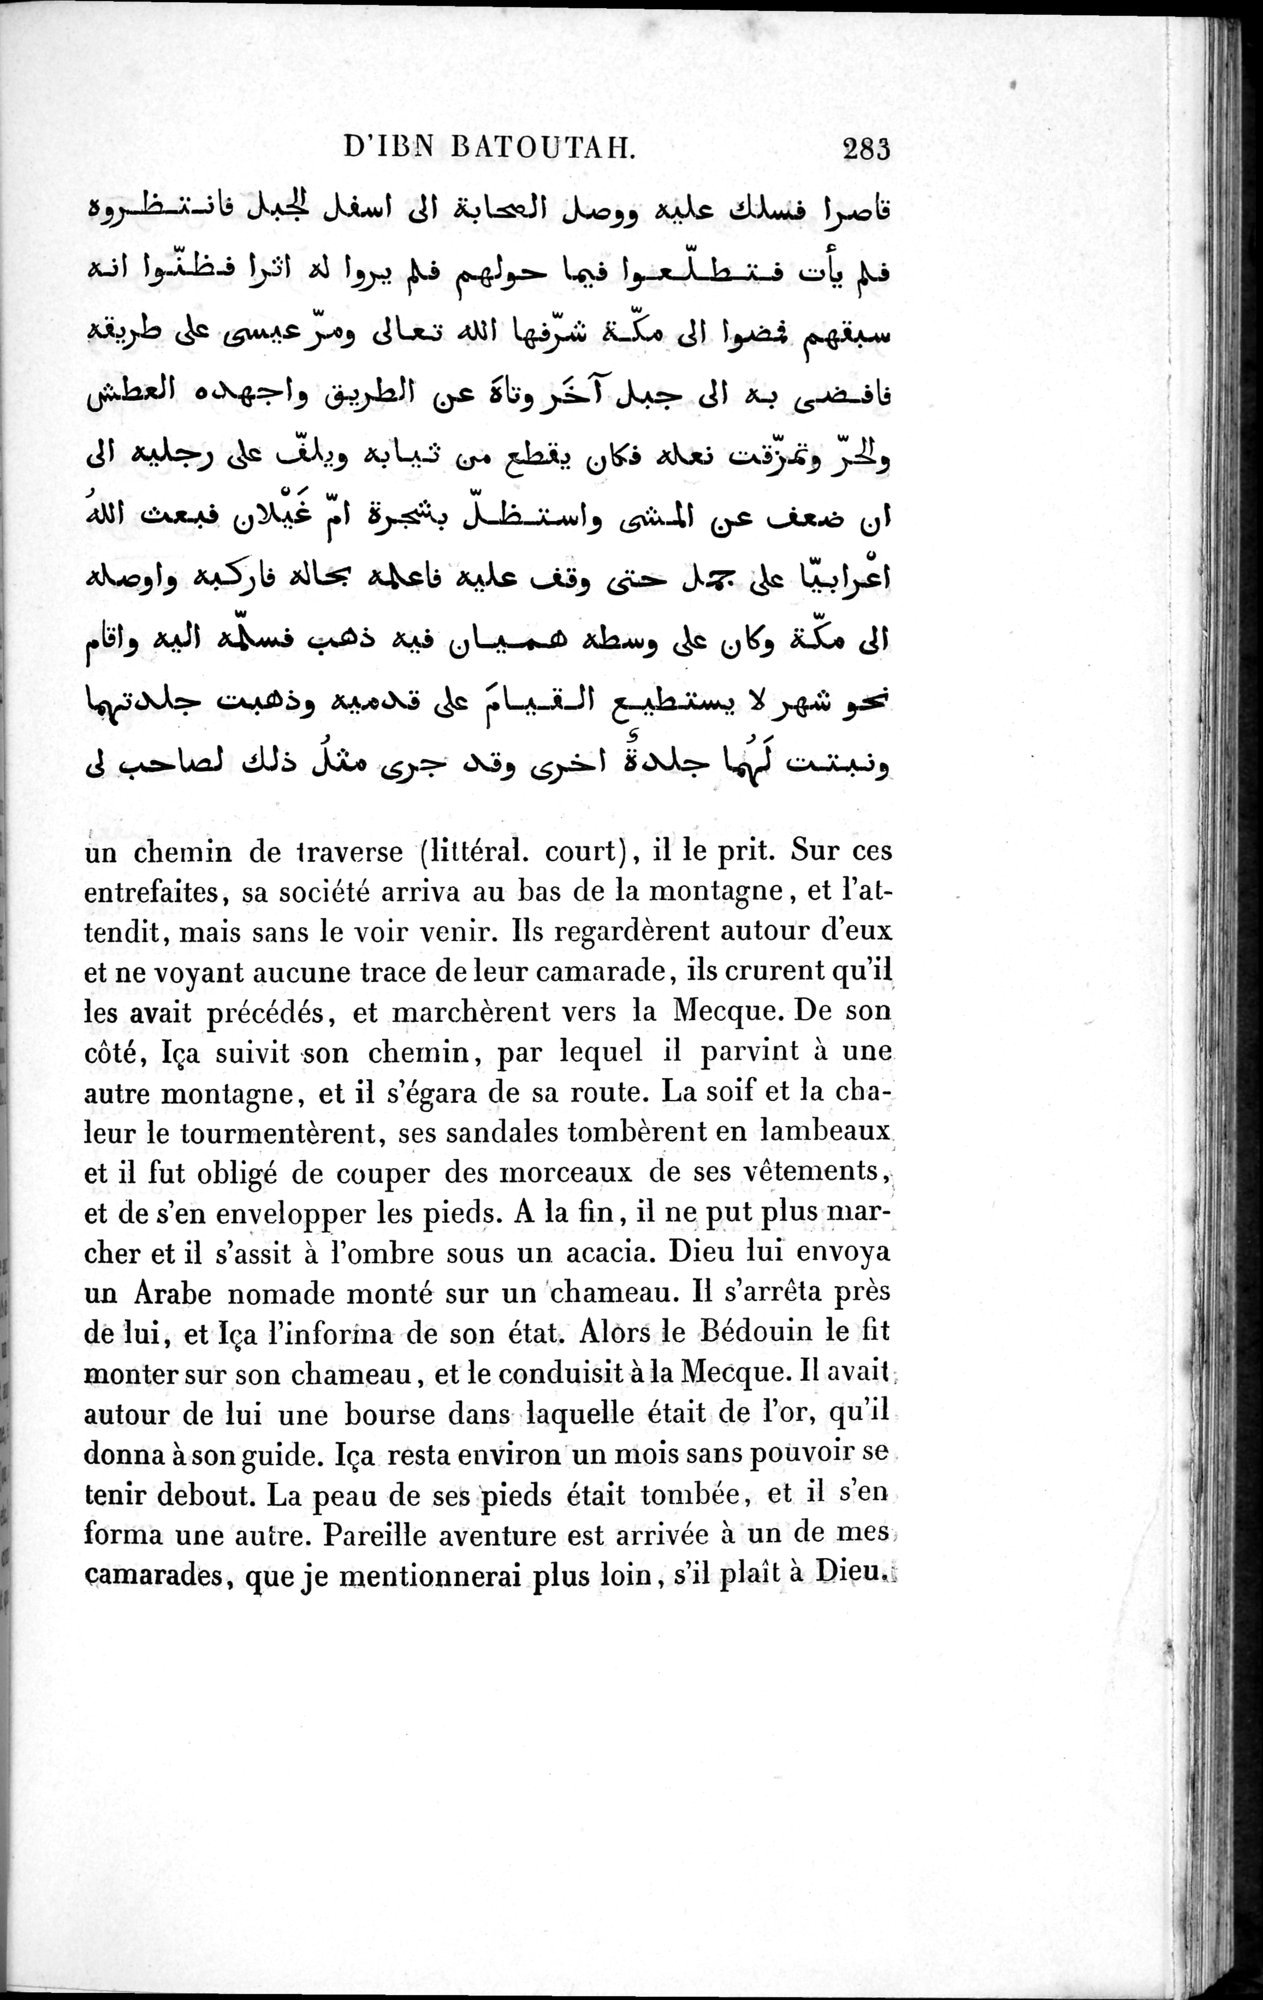 Voyages d'Ibn Batoutah : vol.1 / Page 343 (Grayscale High Resolution Image)